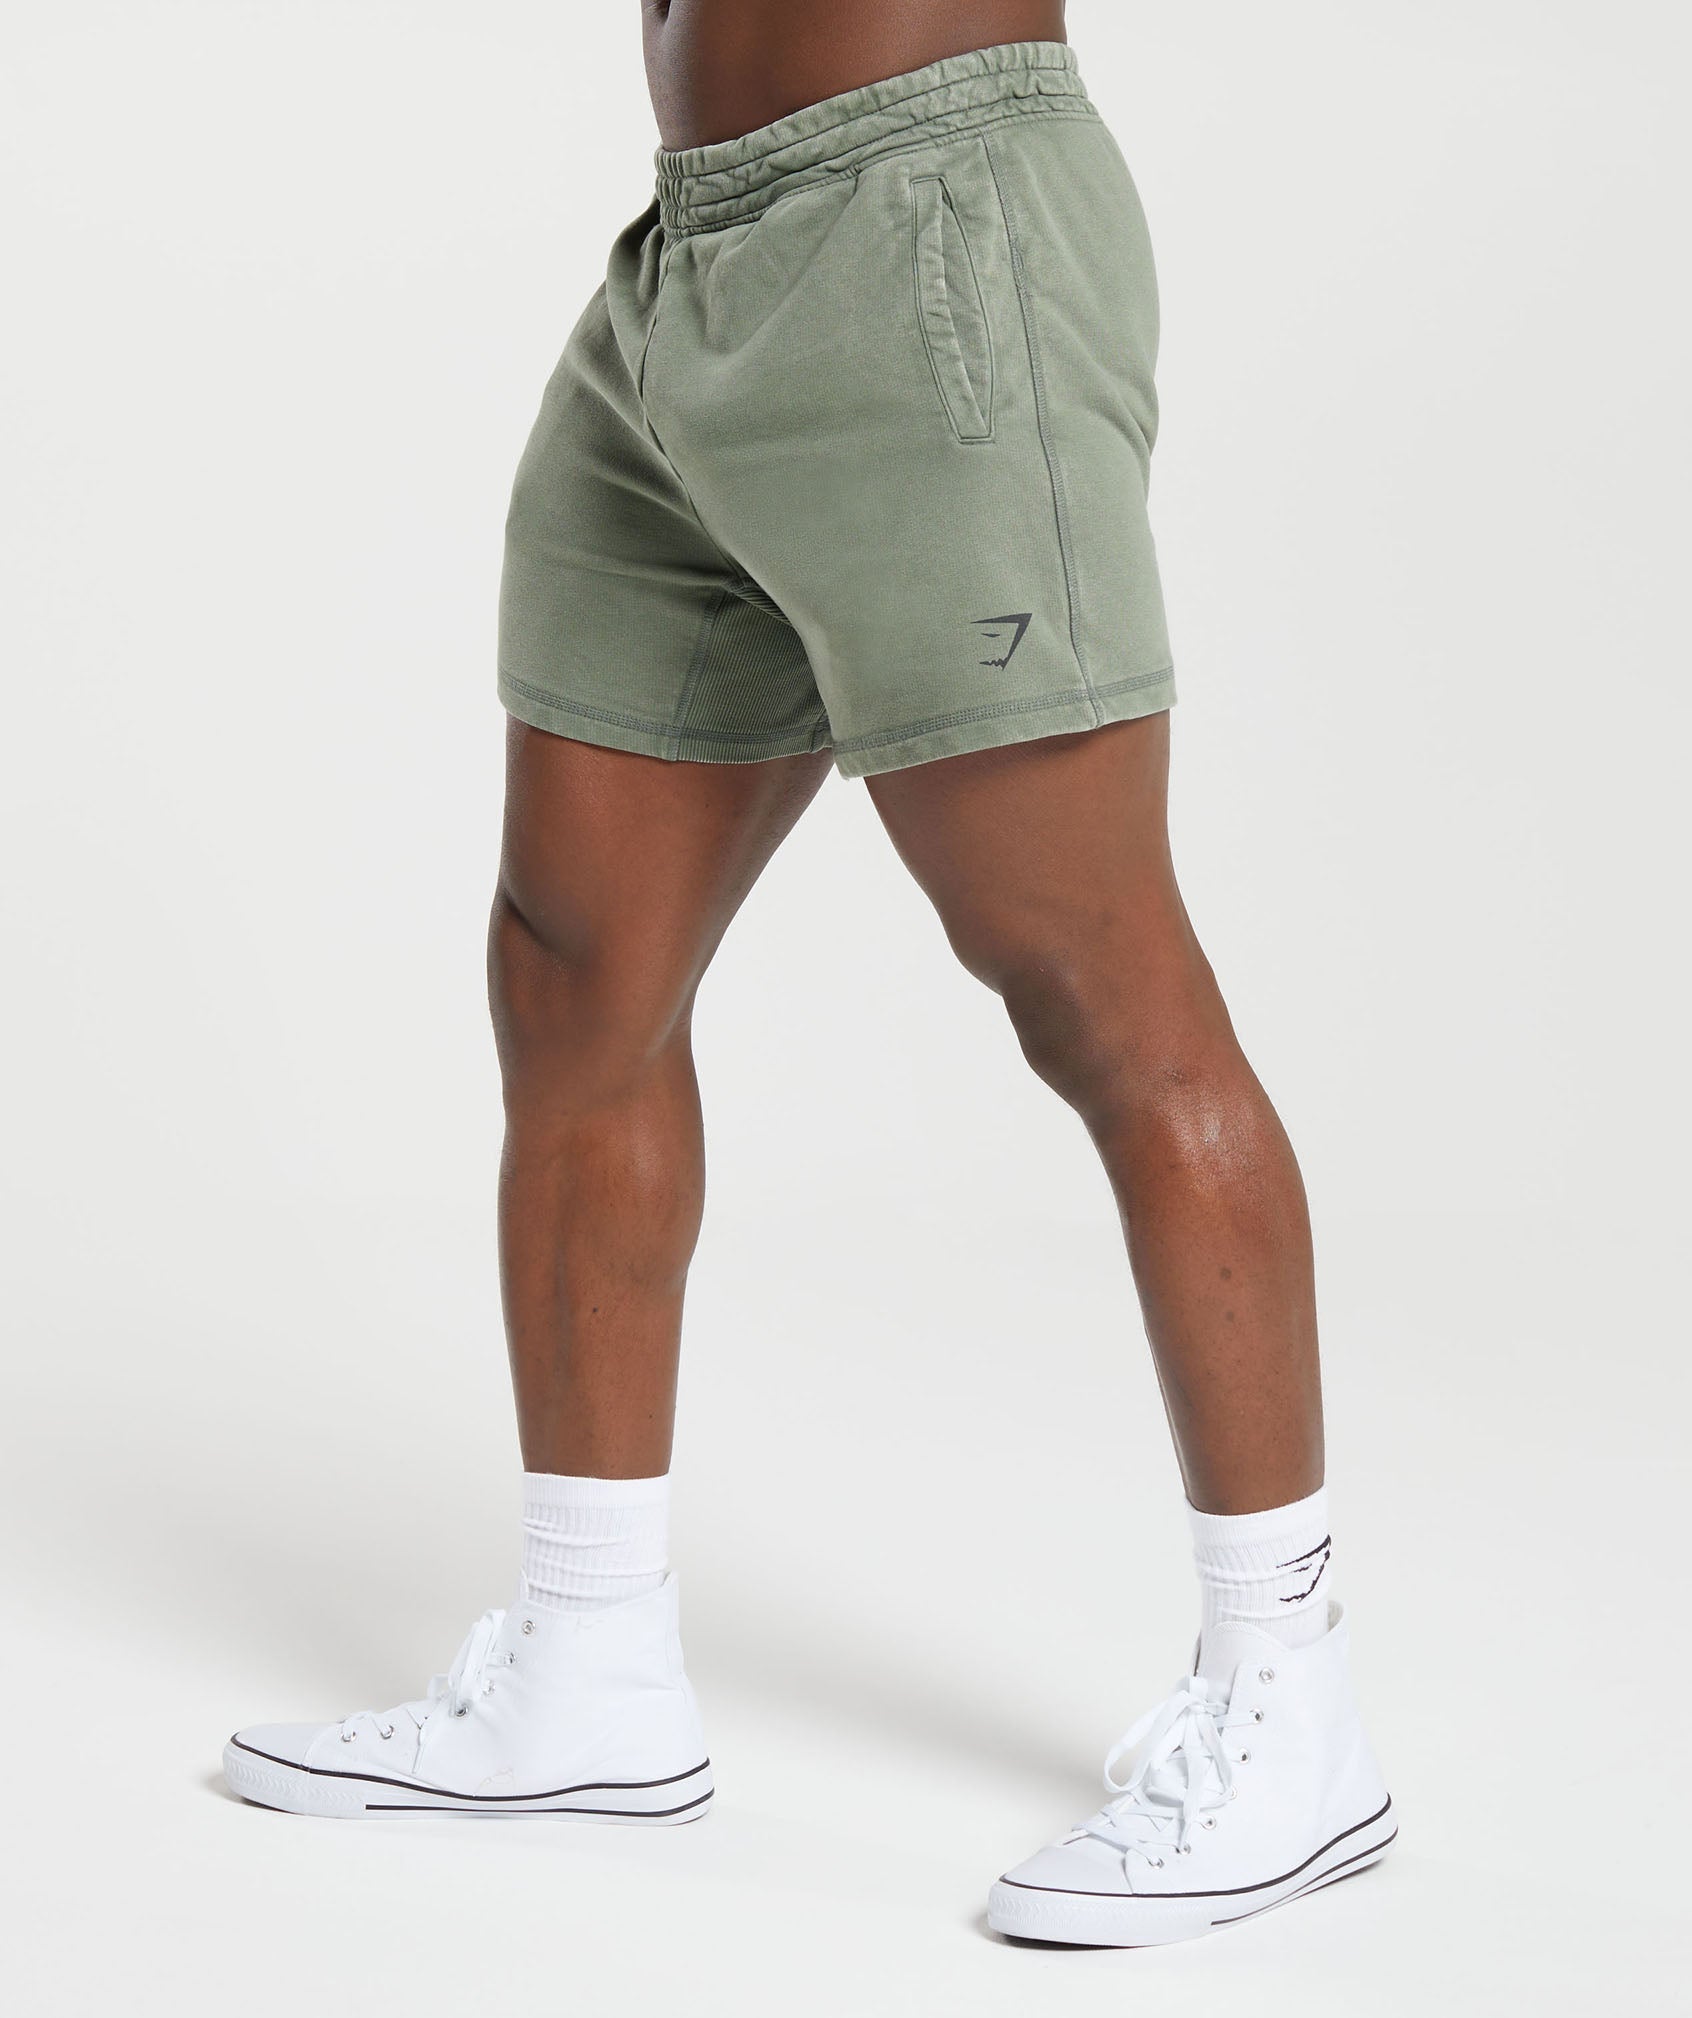 Heritage 5" Shorts in Dusk Green - view 3